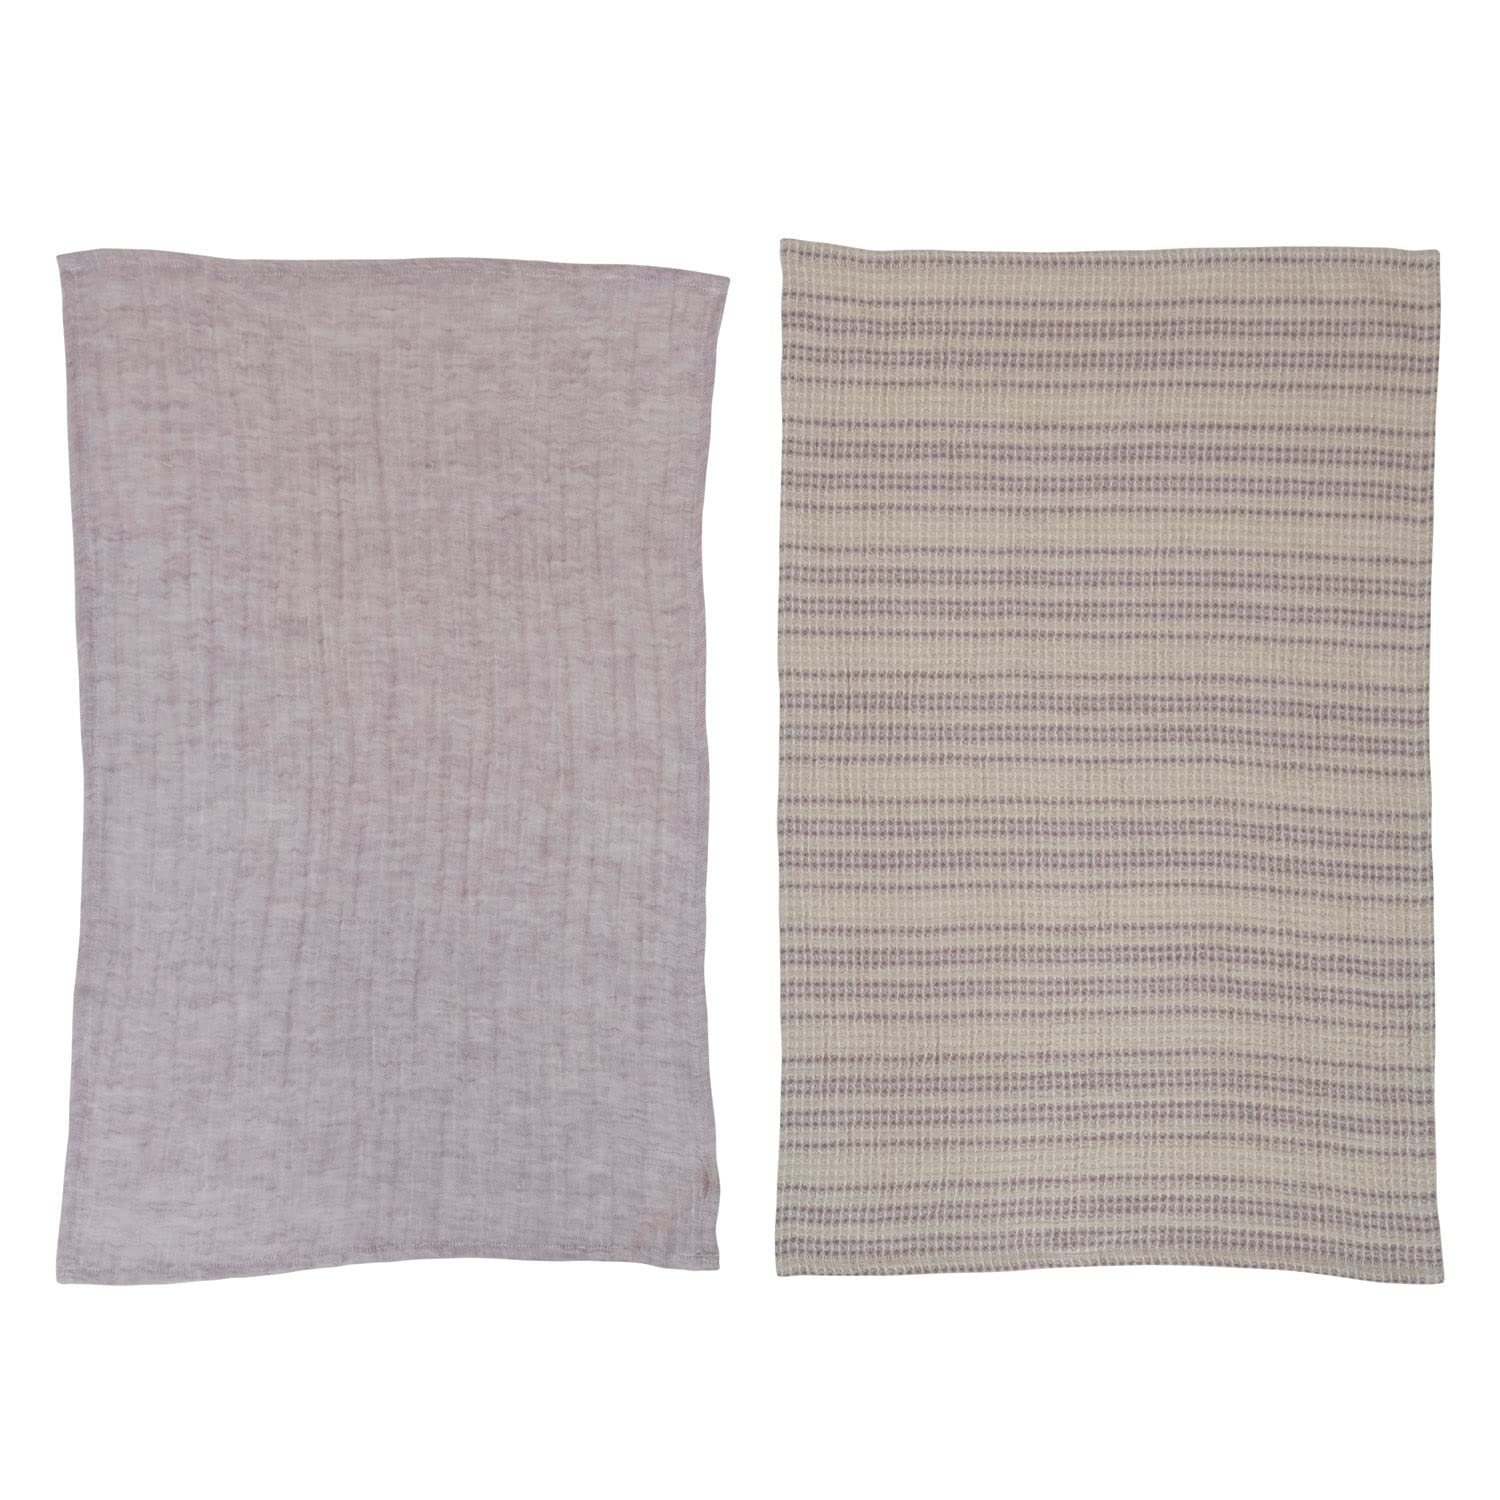 Bloomingville Natural and Lilac Woven Cotton, 2 Styles Tea Towels, 28" L x 18" W x 0" H, Grey